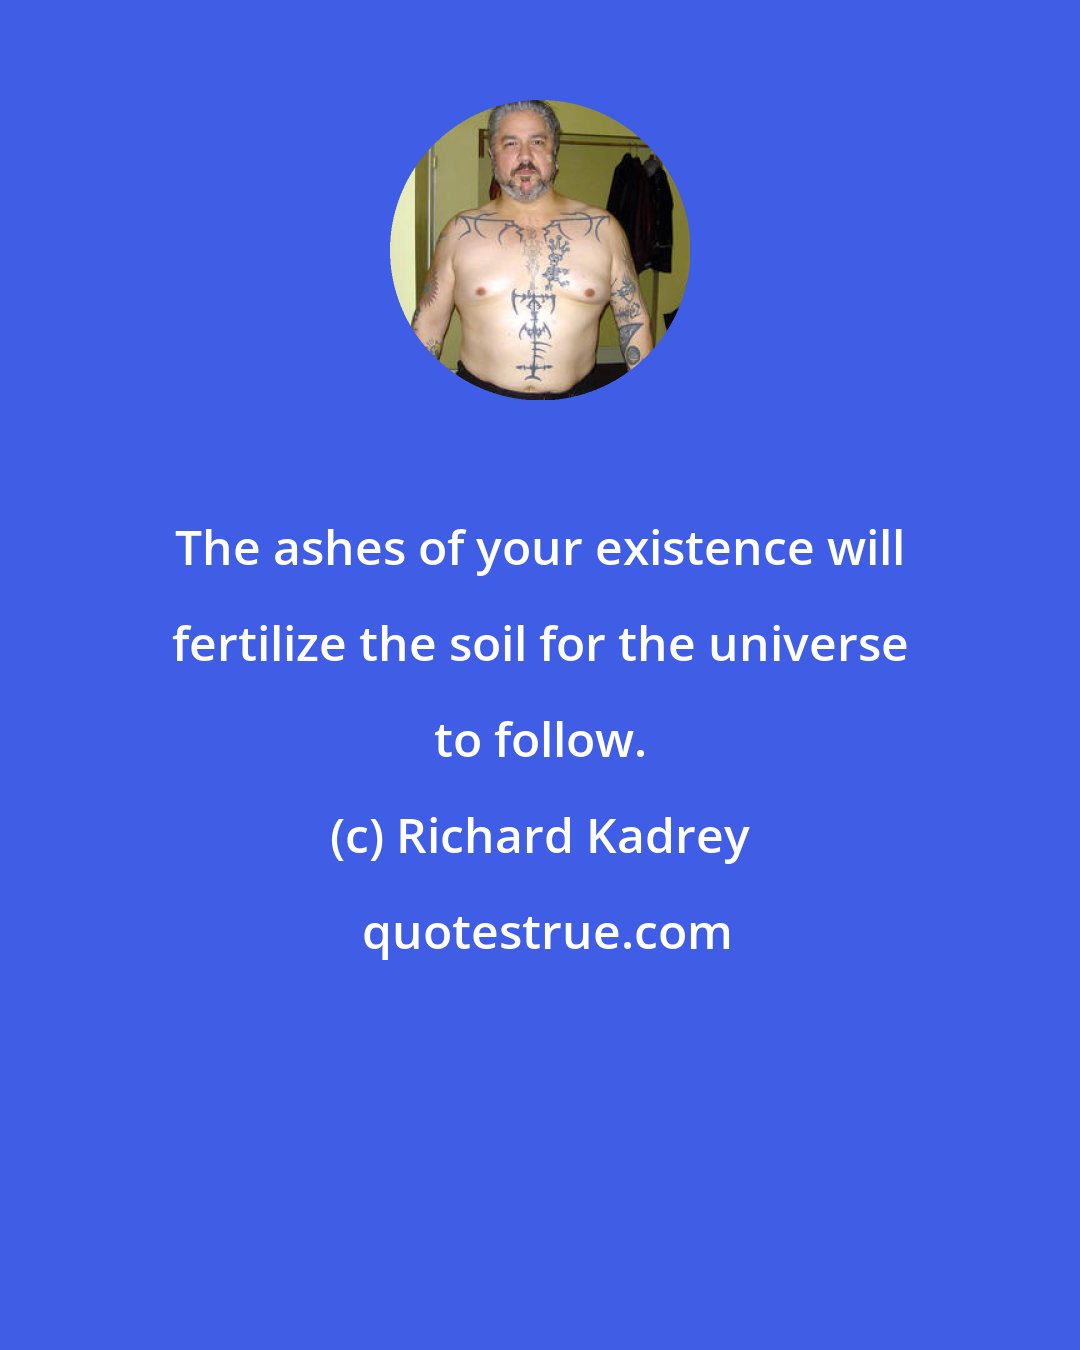 Richard Kadrey: The ashes of your existence will fertilize the soil for the universe to follow.